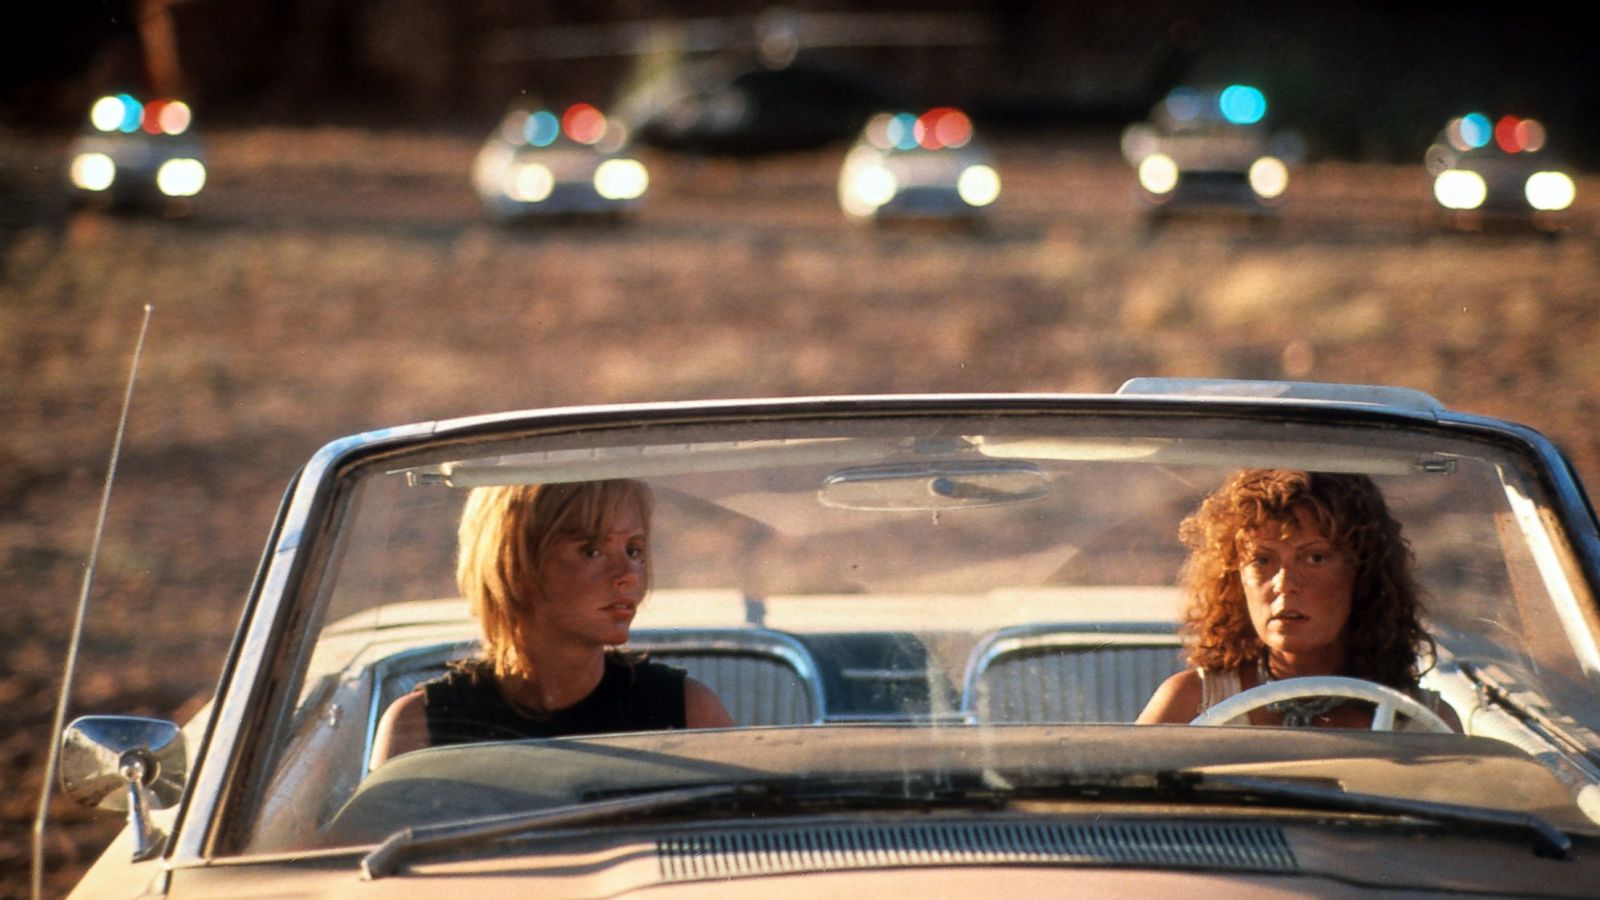 Brad Pitt Says He Lost 'Thelma & Louise' Role Twice Before Getting It